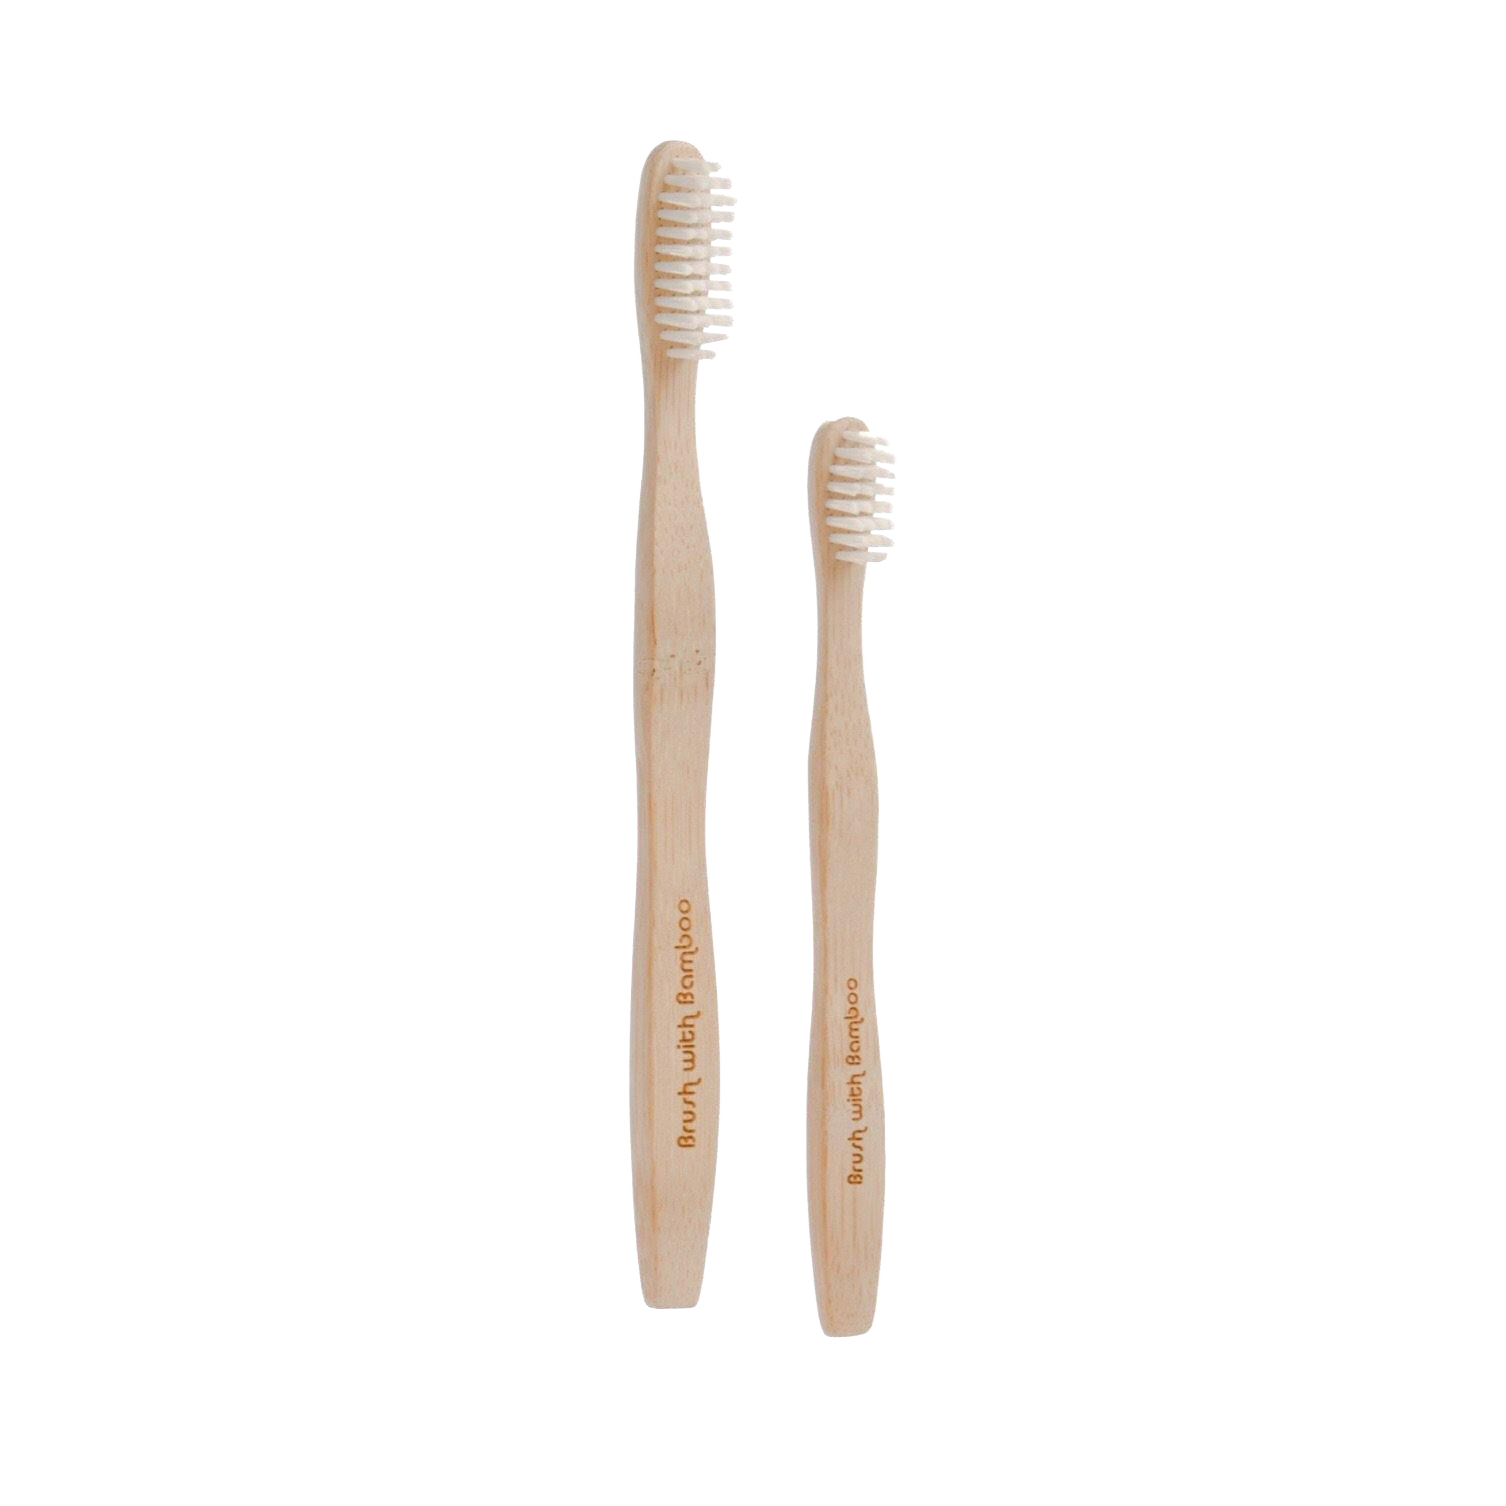 adult size natural bamboo toothbrush and a kid sized natural bamboo toothbrush